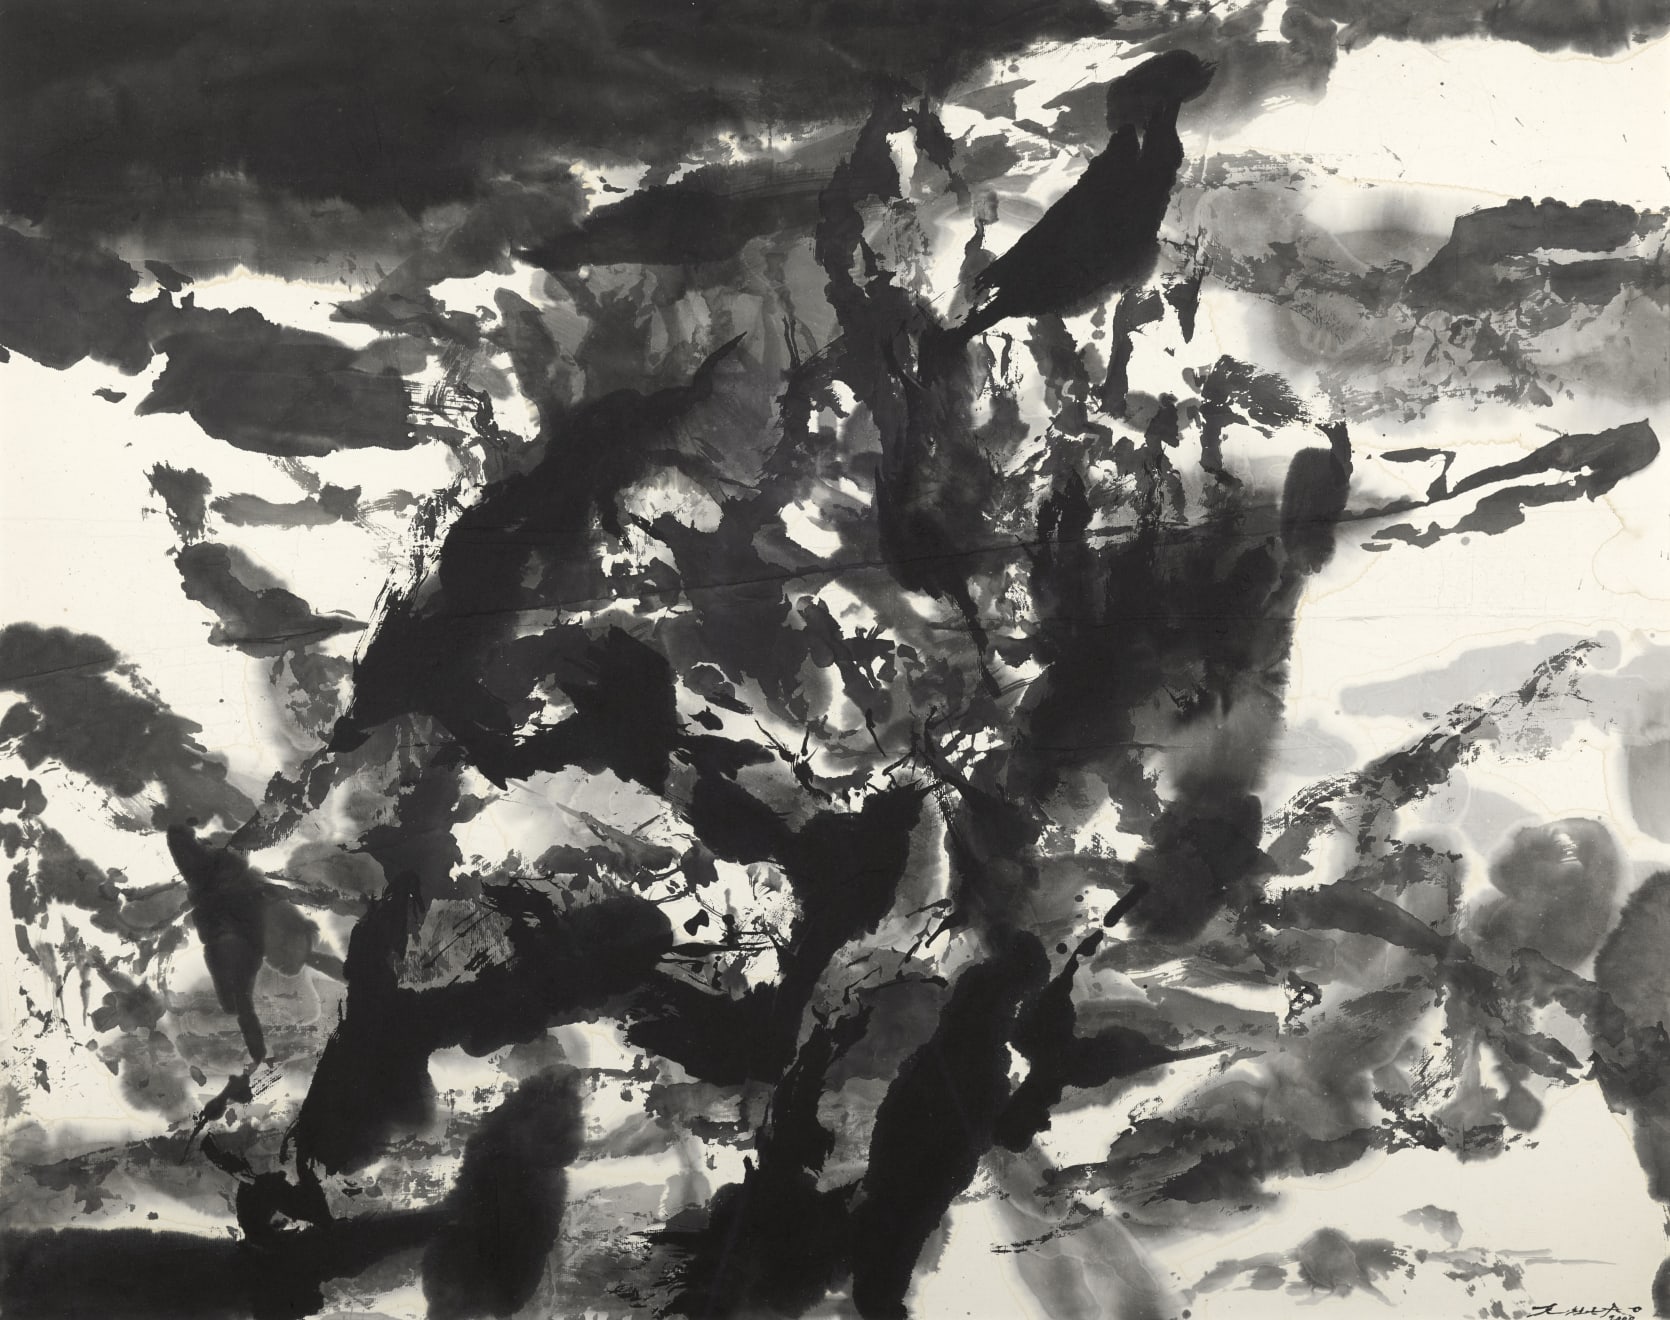 ZAO WOU-KI (1920-2013) Untitled 2000 Ink on paper 75 x 94 cm Signed and dated lower right